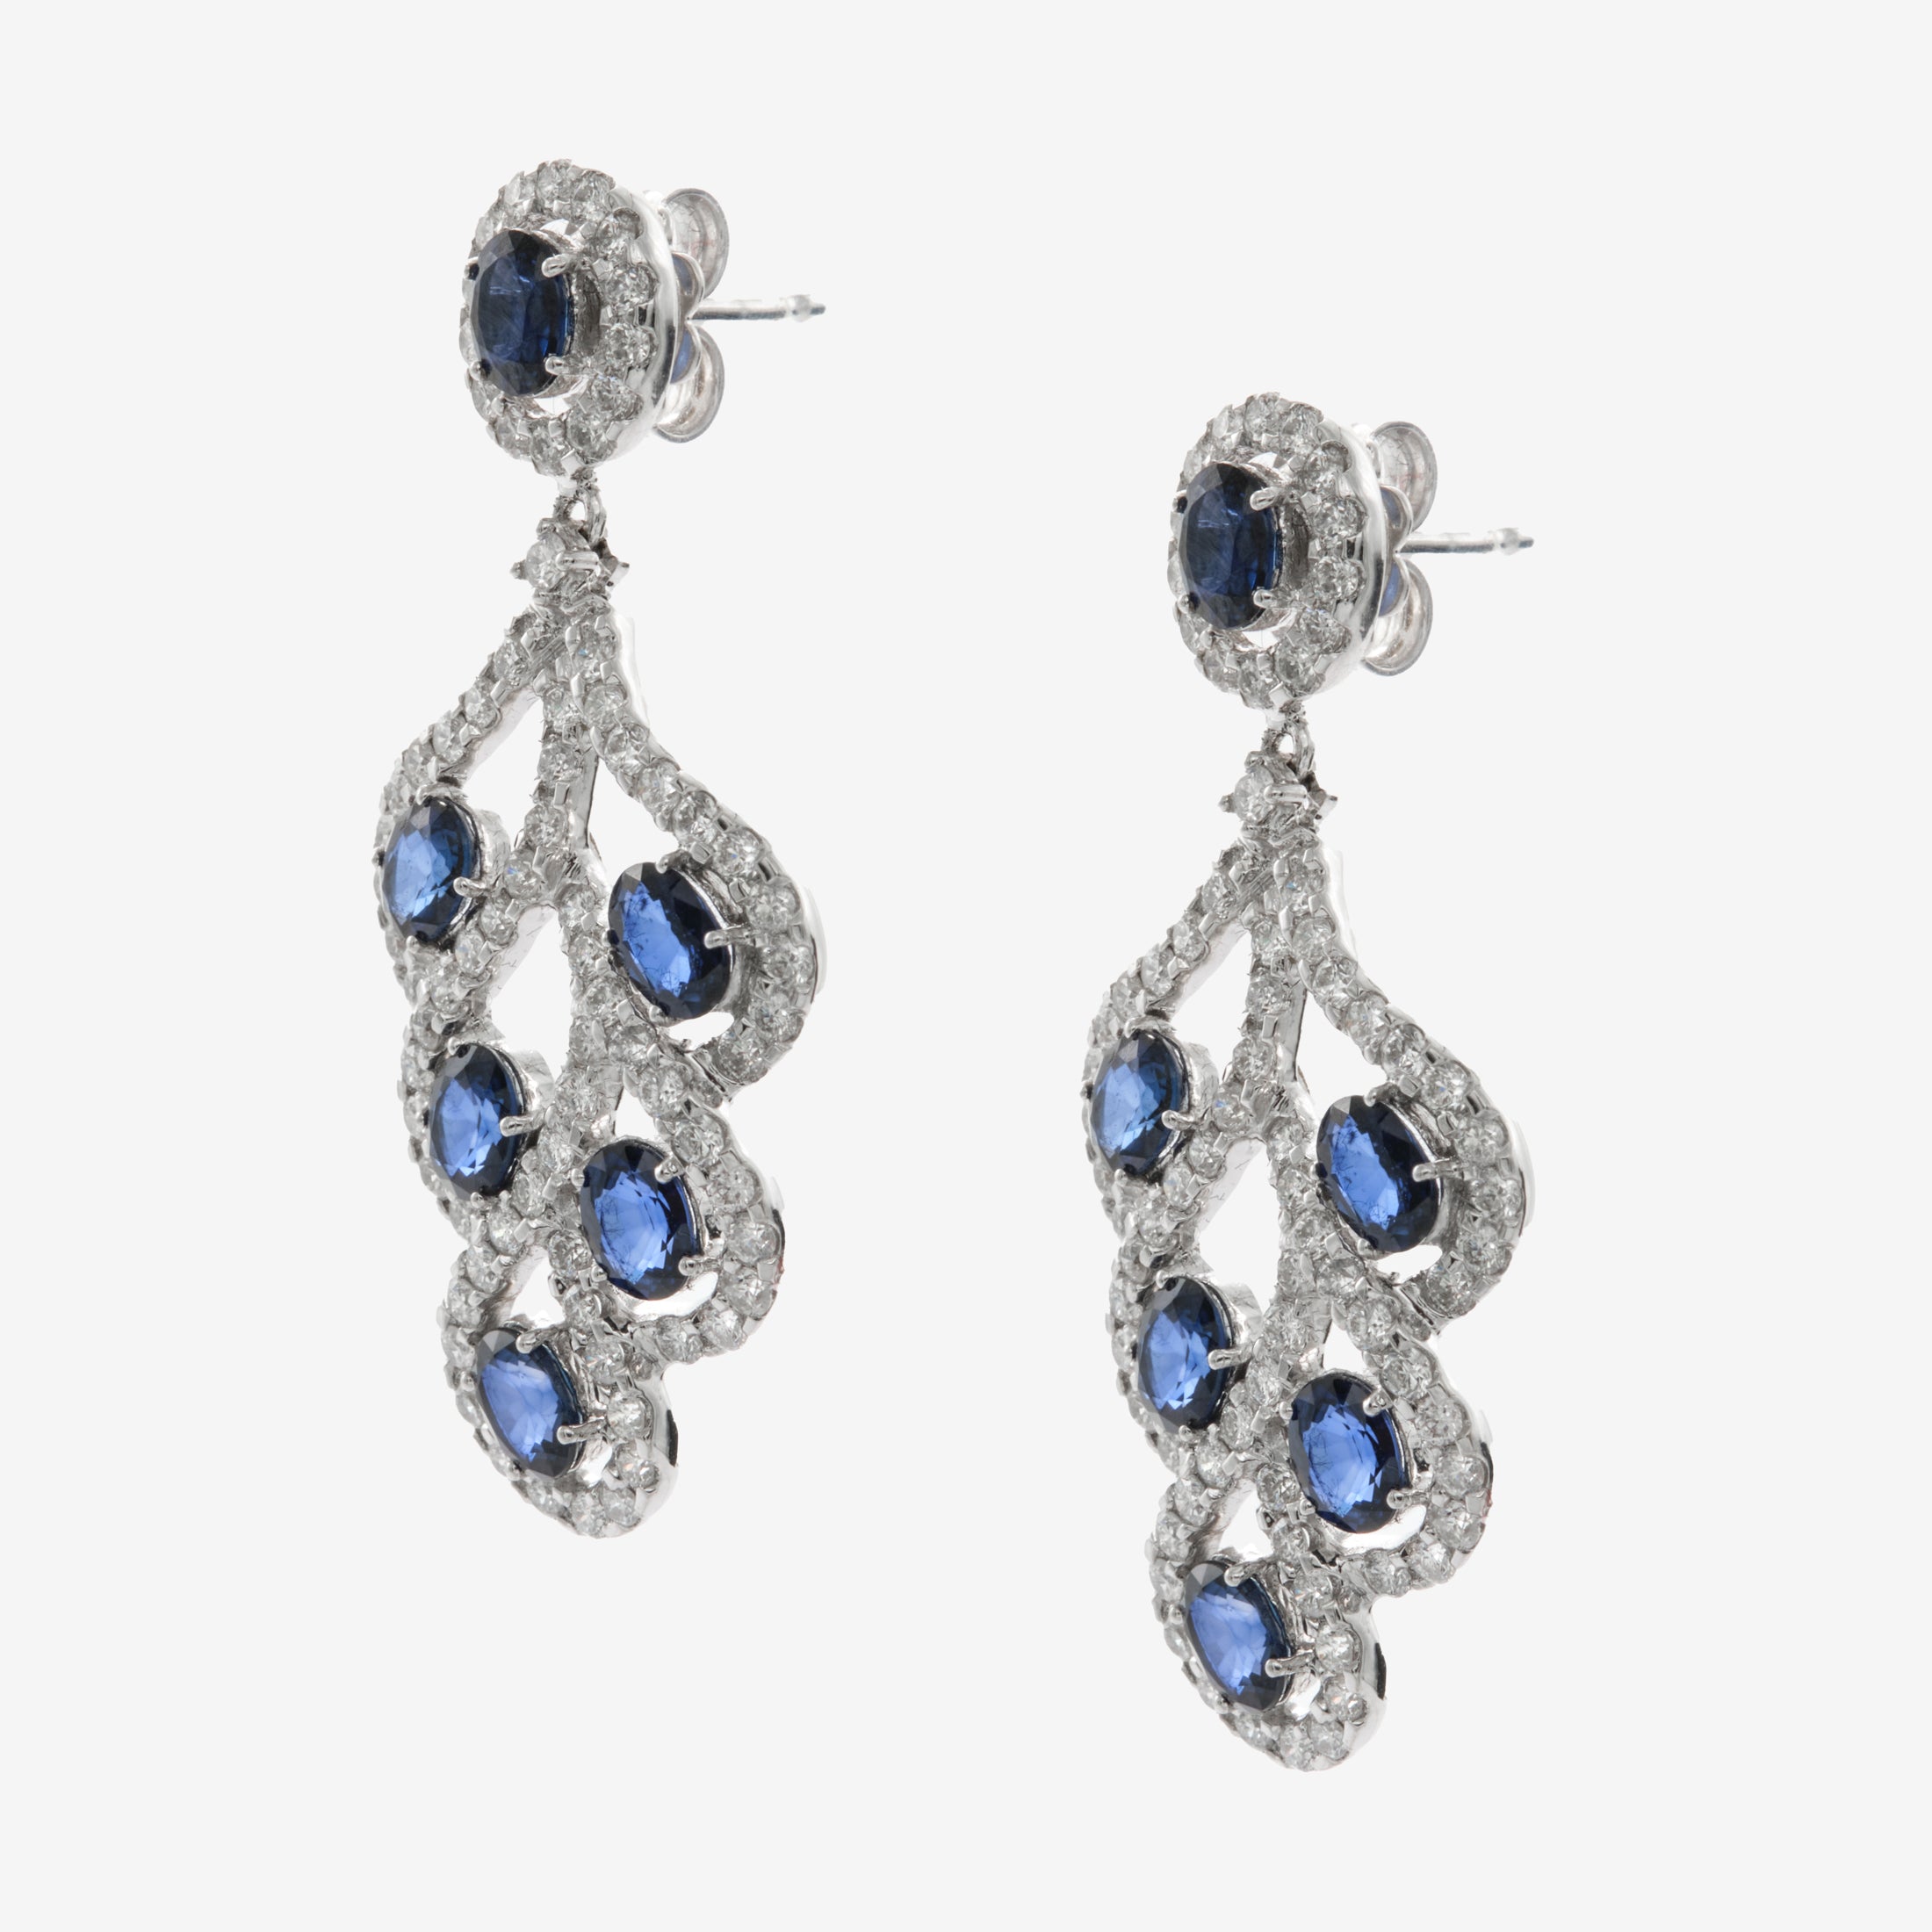 Aster earrings with sapphires and diamonds